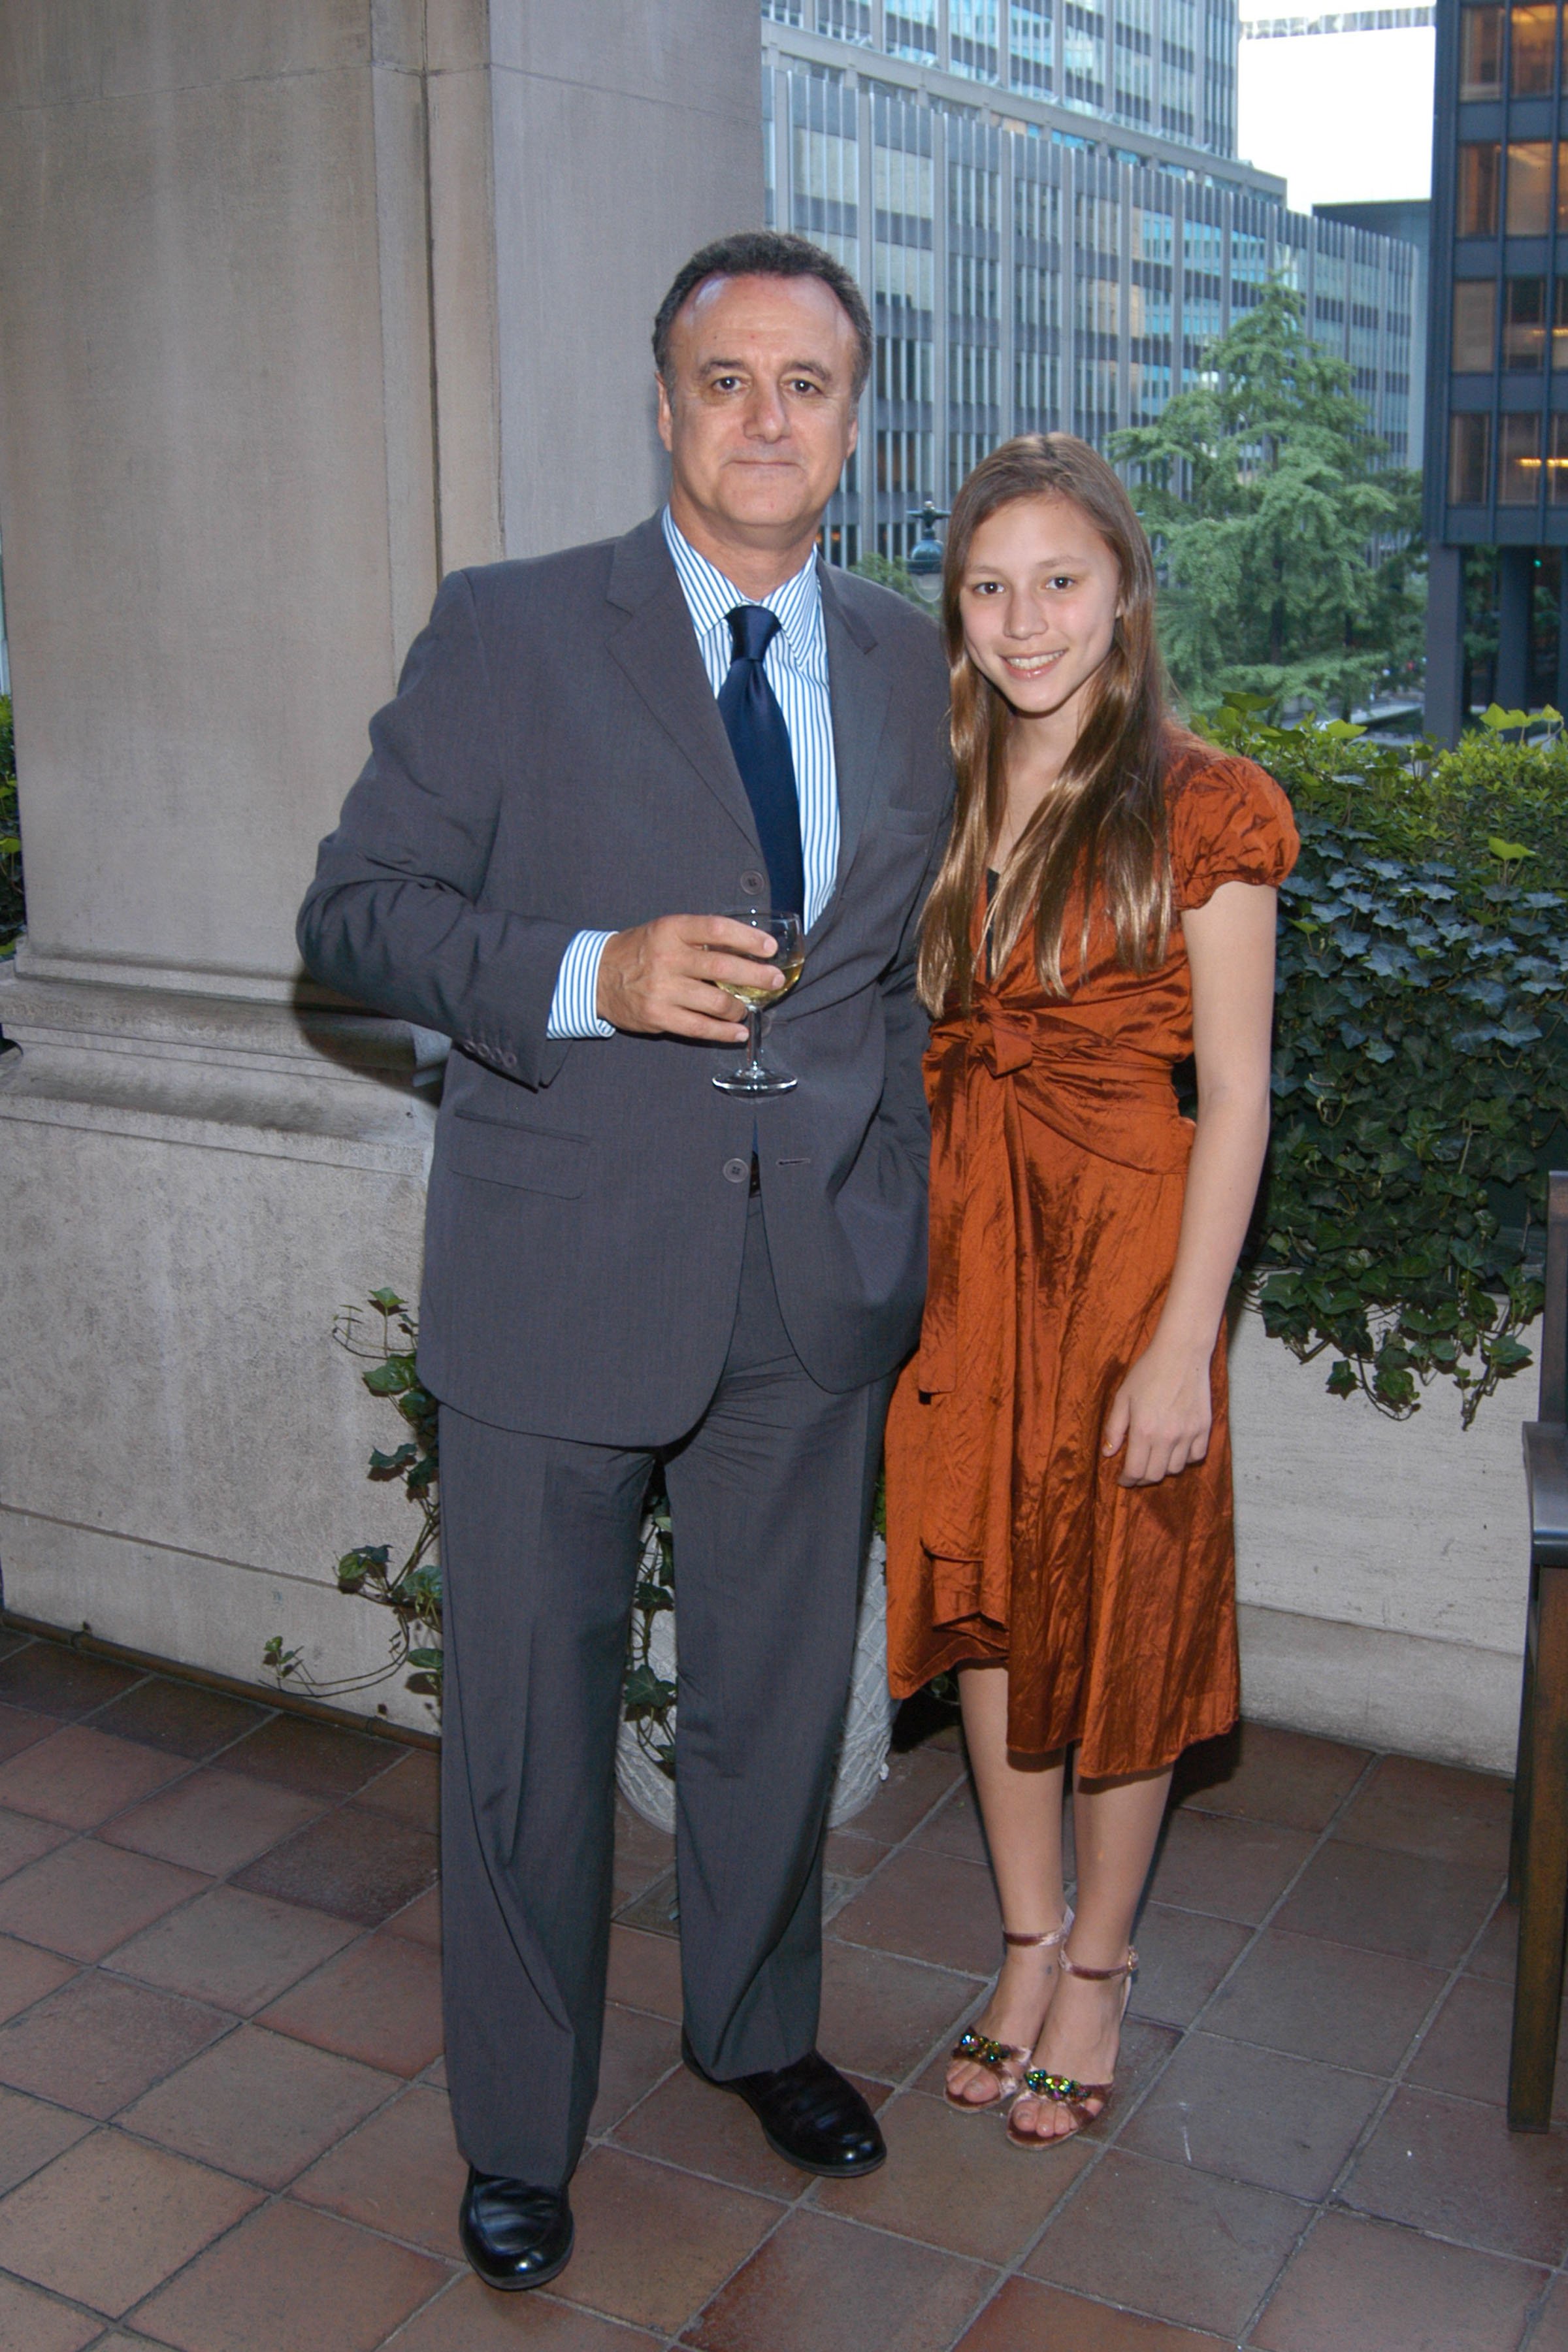 Arthur Becker and Josephine Becker attend 3rd ANNUAL SANSKRITI BENEFIT at New York Racquet & Tennis Club in New York City on May 24, 2007 | Source: Getty Images